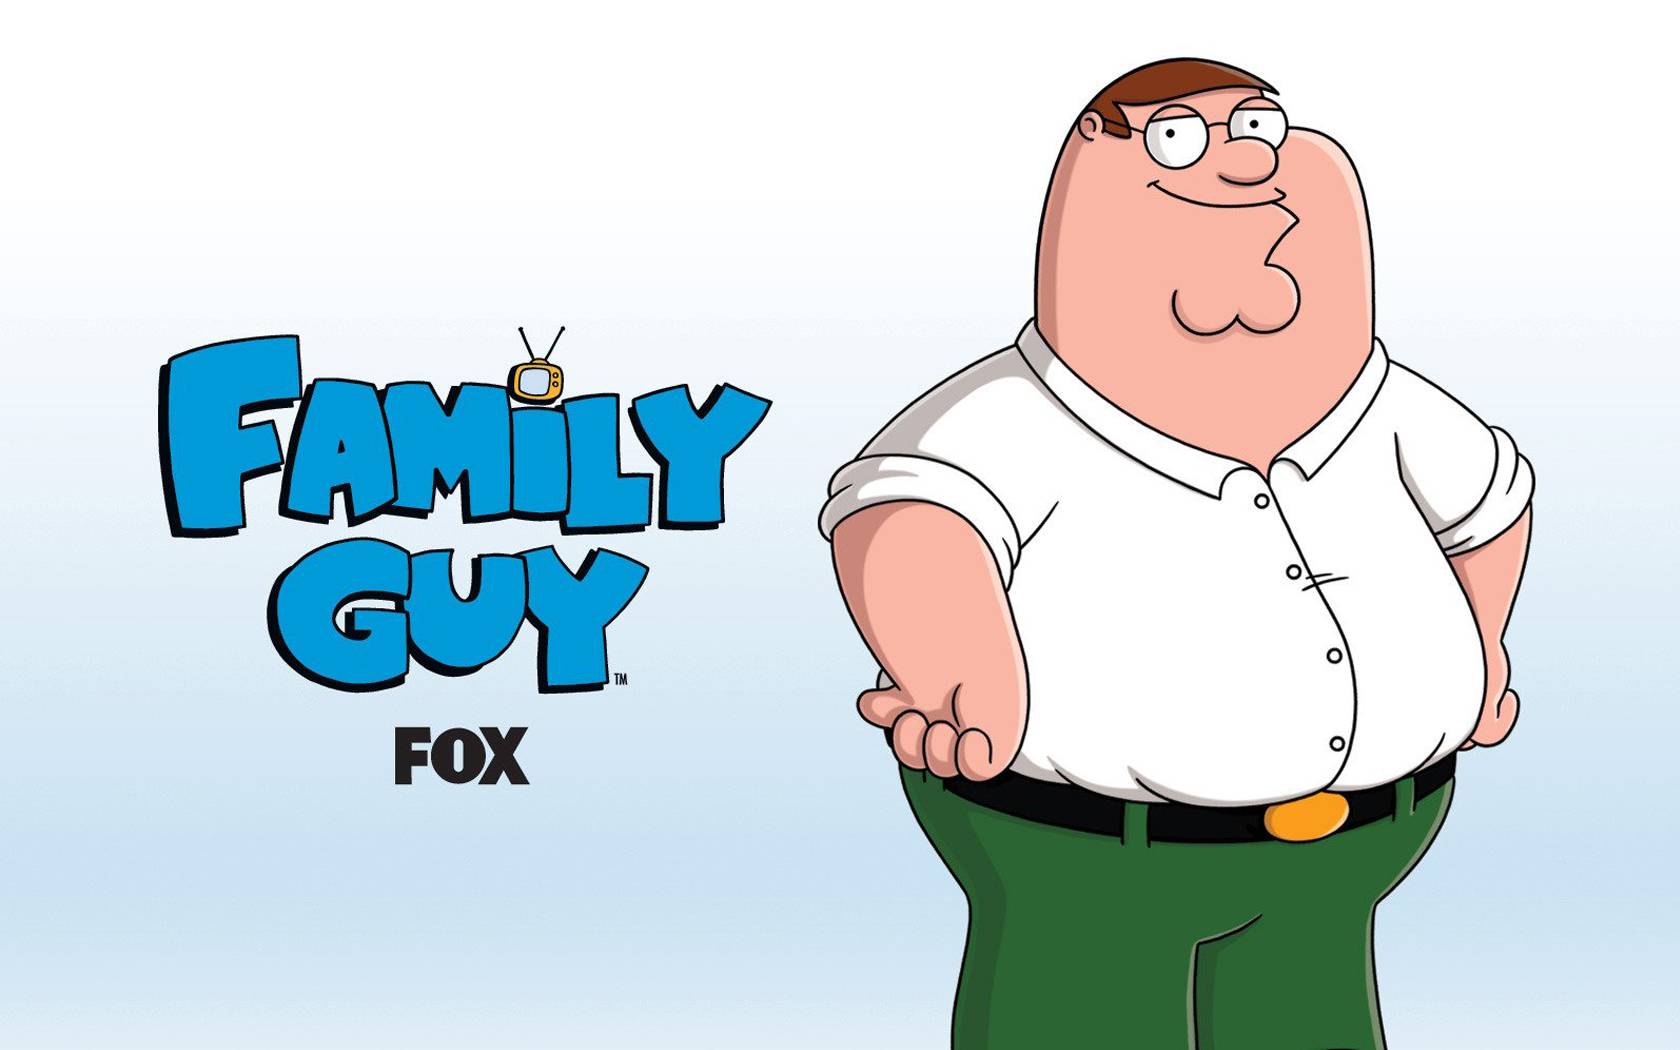 Share 58+ peter griffin wallpaper super hot - in.cdgdbentre